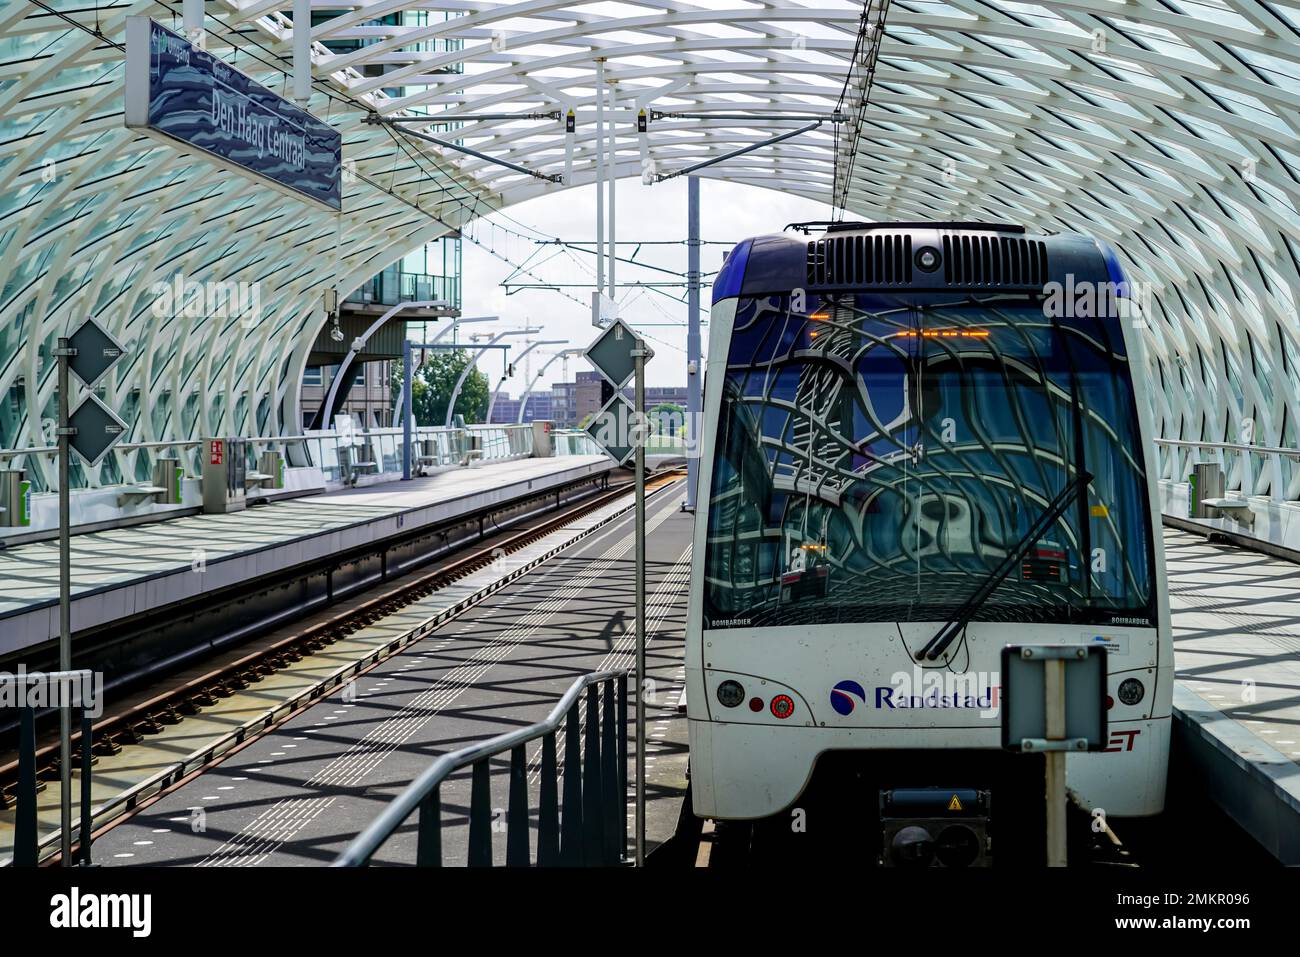 Platform with train at RET Subway train station in The Hague Central  Station. Numerous reflections can be seen in the front window of a waiting  train Stock Photo - Alamy